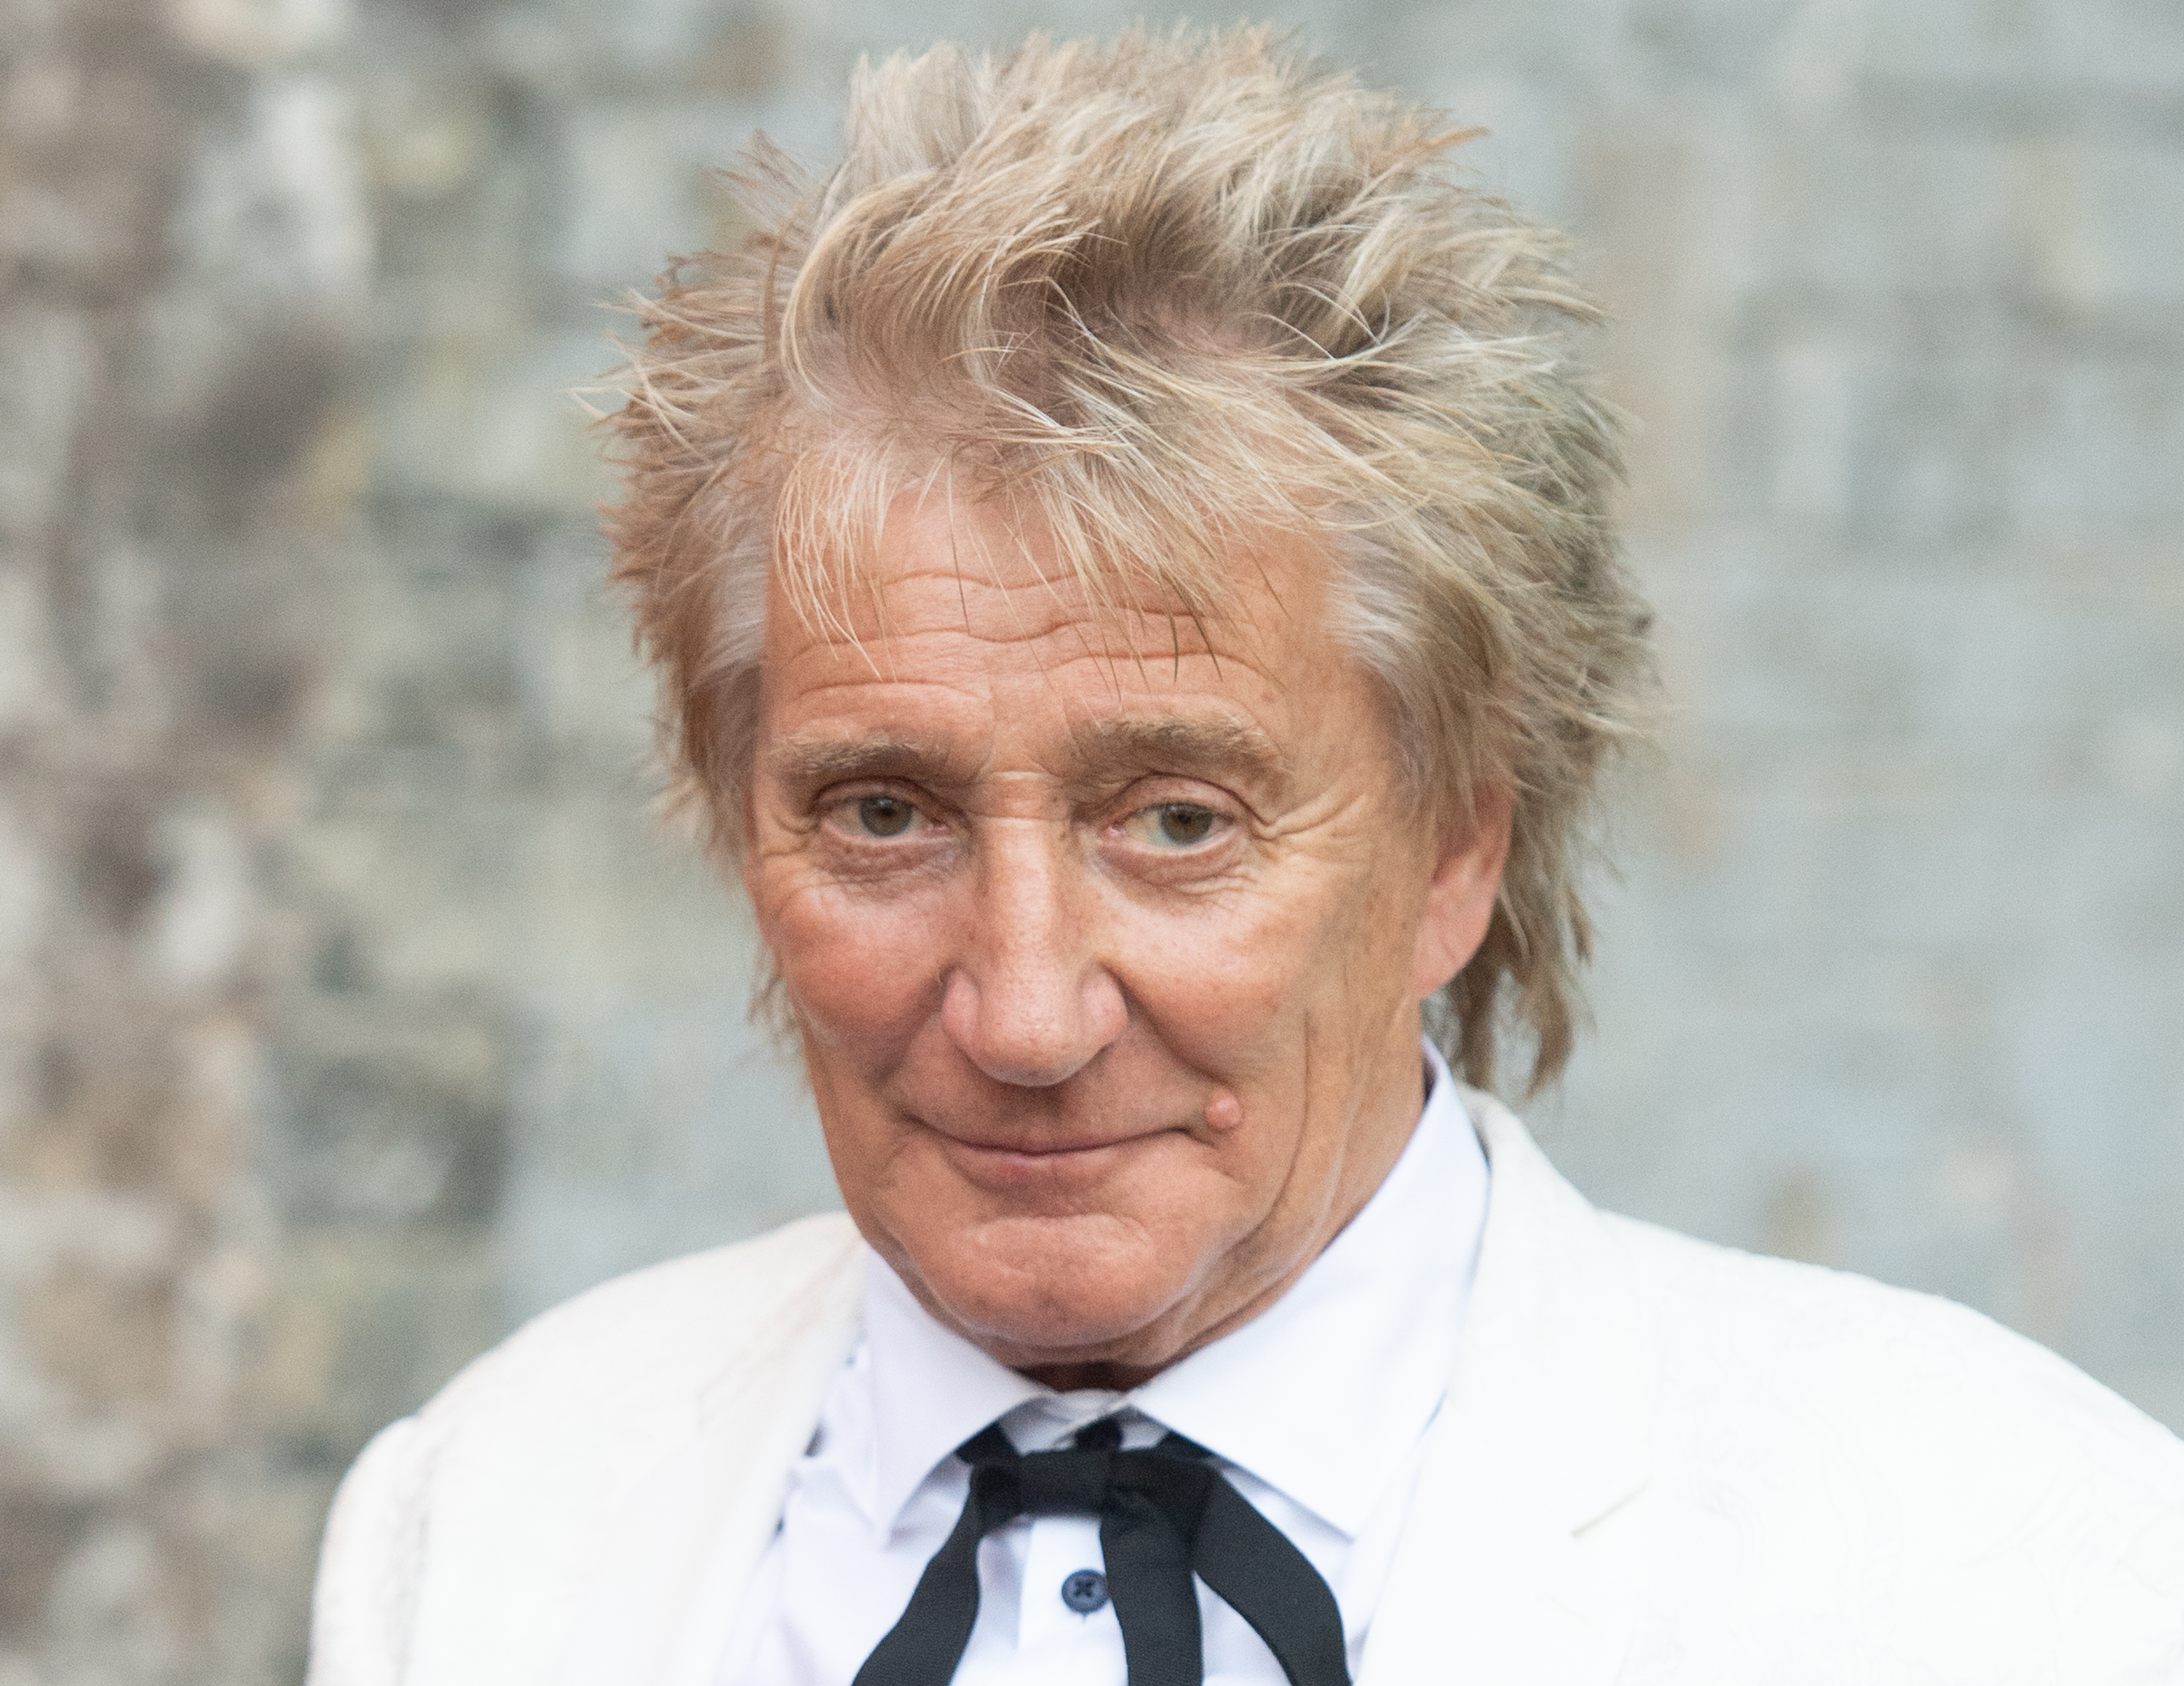 Rod Stewart im The Roundhouse am 14. September 2021 in London, England | Quelle: Getty Images